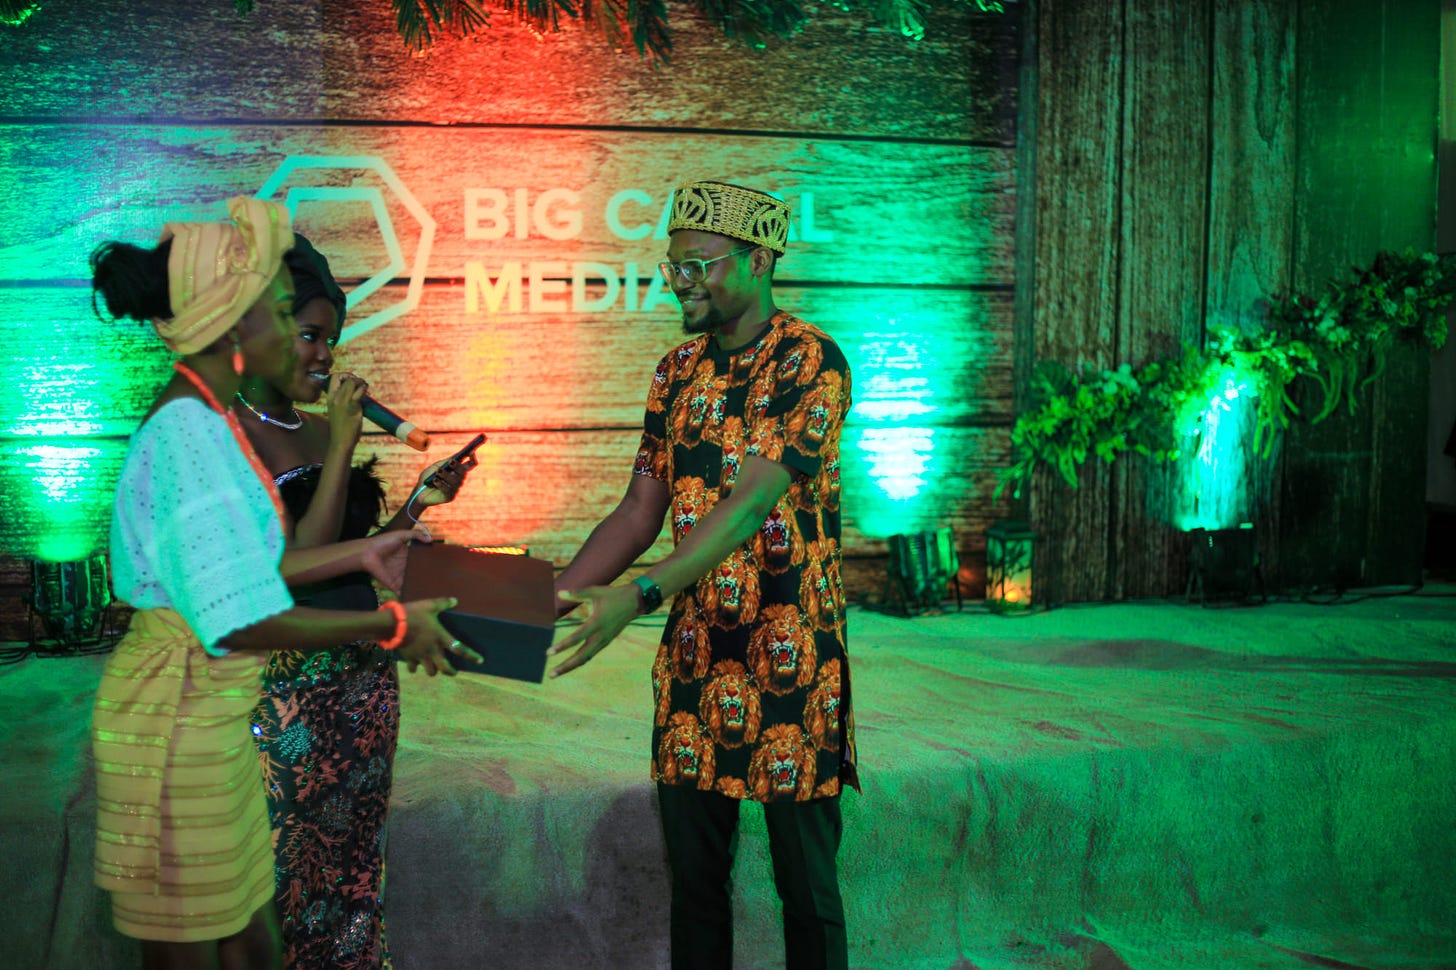 Dumebi Iwuchukwu receiving his award as the ‘Best Team lead’ at a Big Cabal Media event during his time as the Head of Design